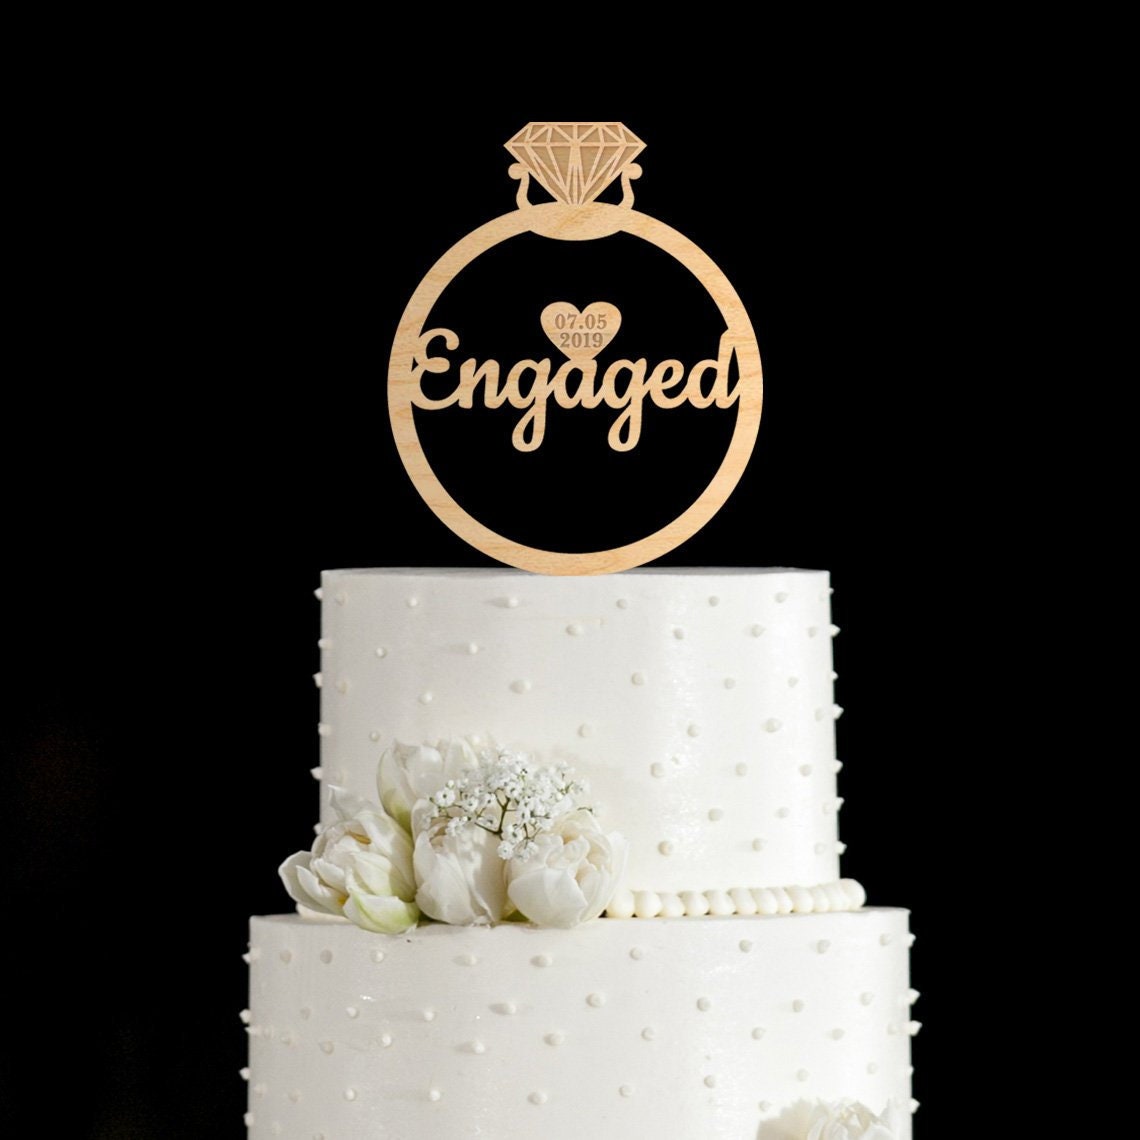 O'Creme Engaged with Ring and Diamond-Ring Cake Topper - Gold